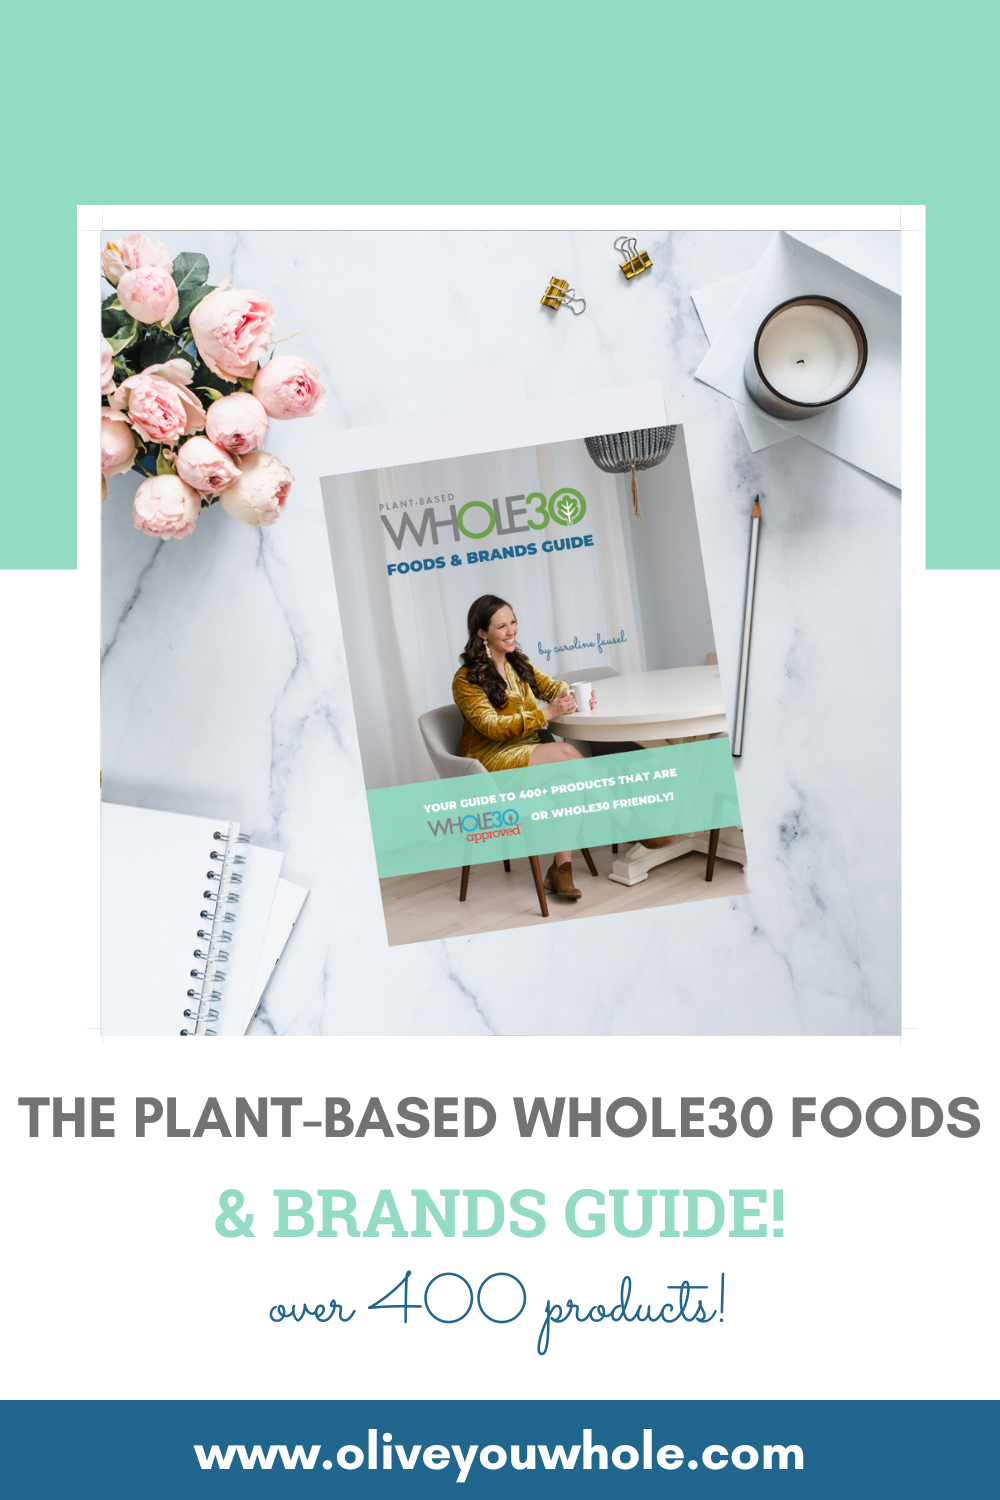 https://www.oliveyouwhole.com/wp-content/uploads/2023/01/Plant-Based-Whole30-Foods-Brands-Pinterest.png